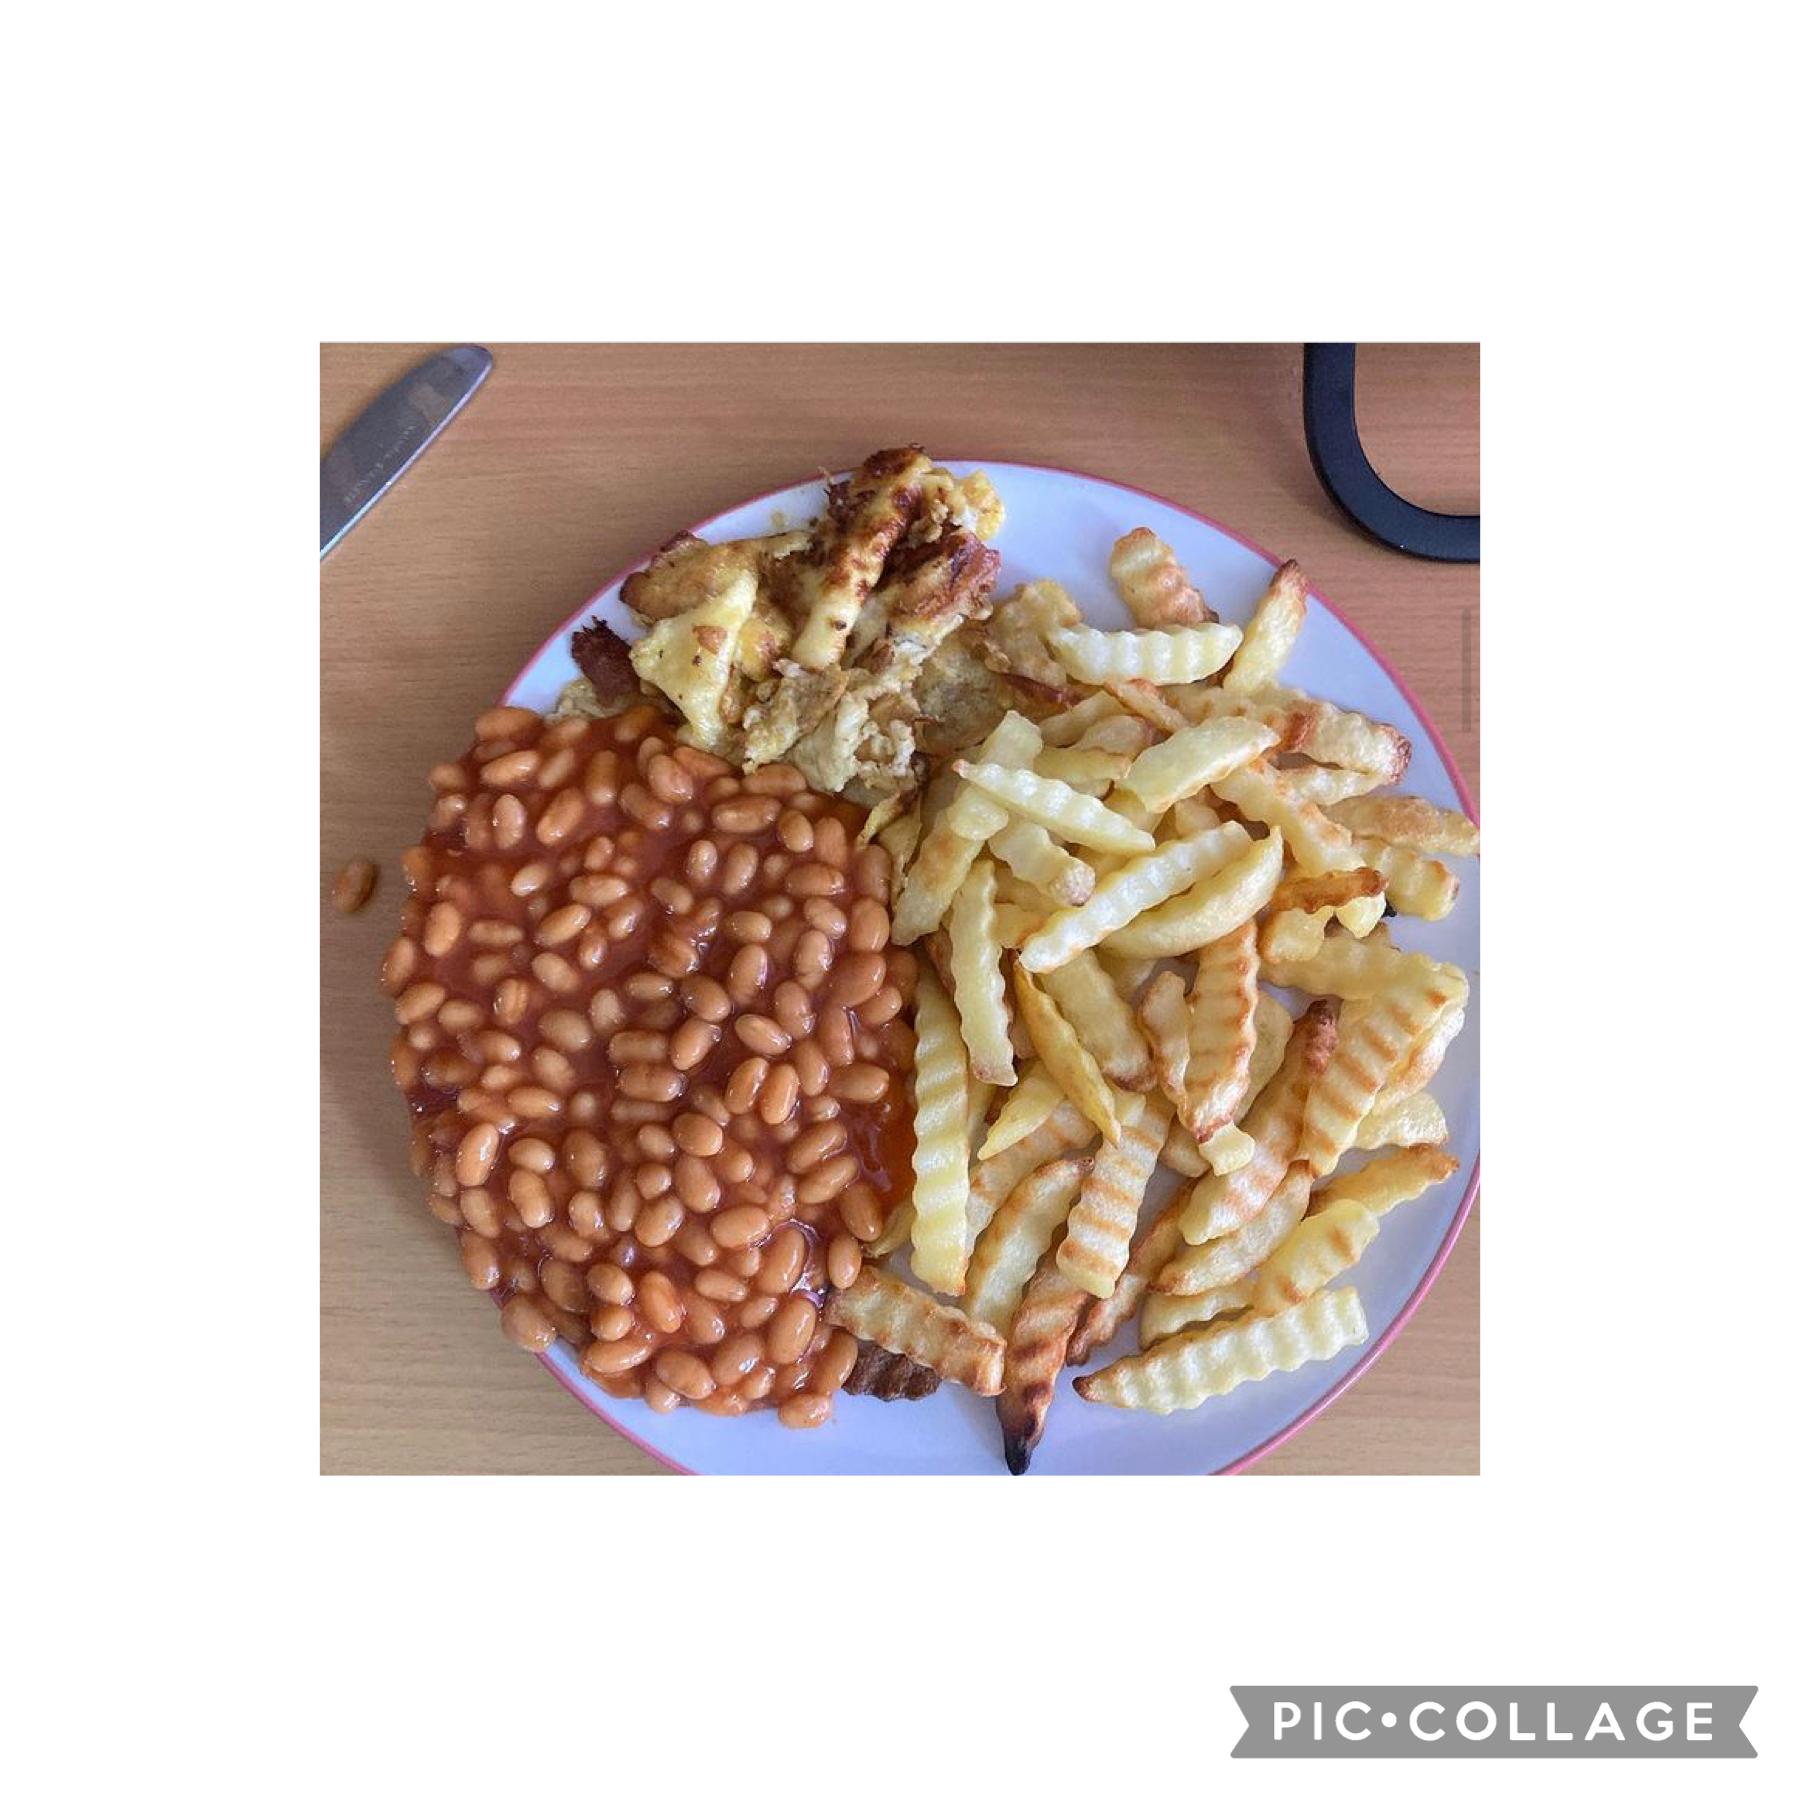 Omelettes and chips , beans
My lunch 🤩🤩 #Lunch